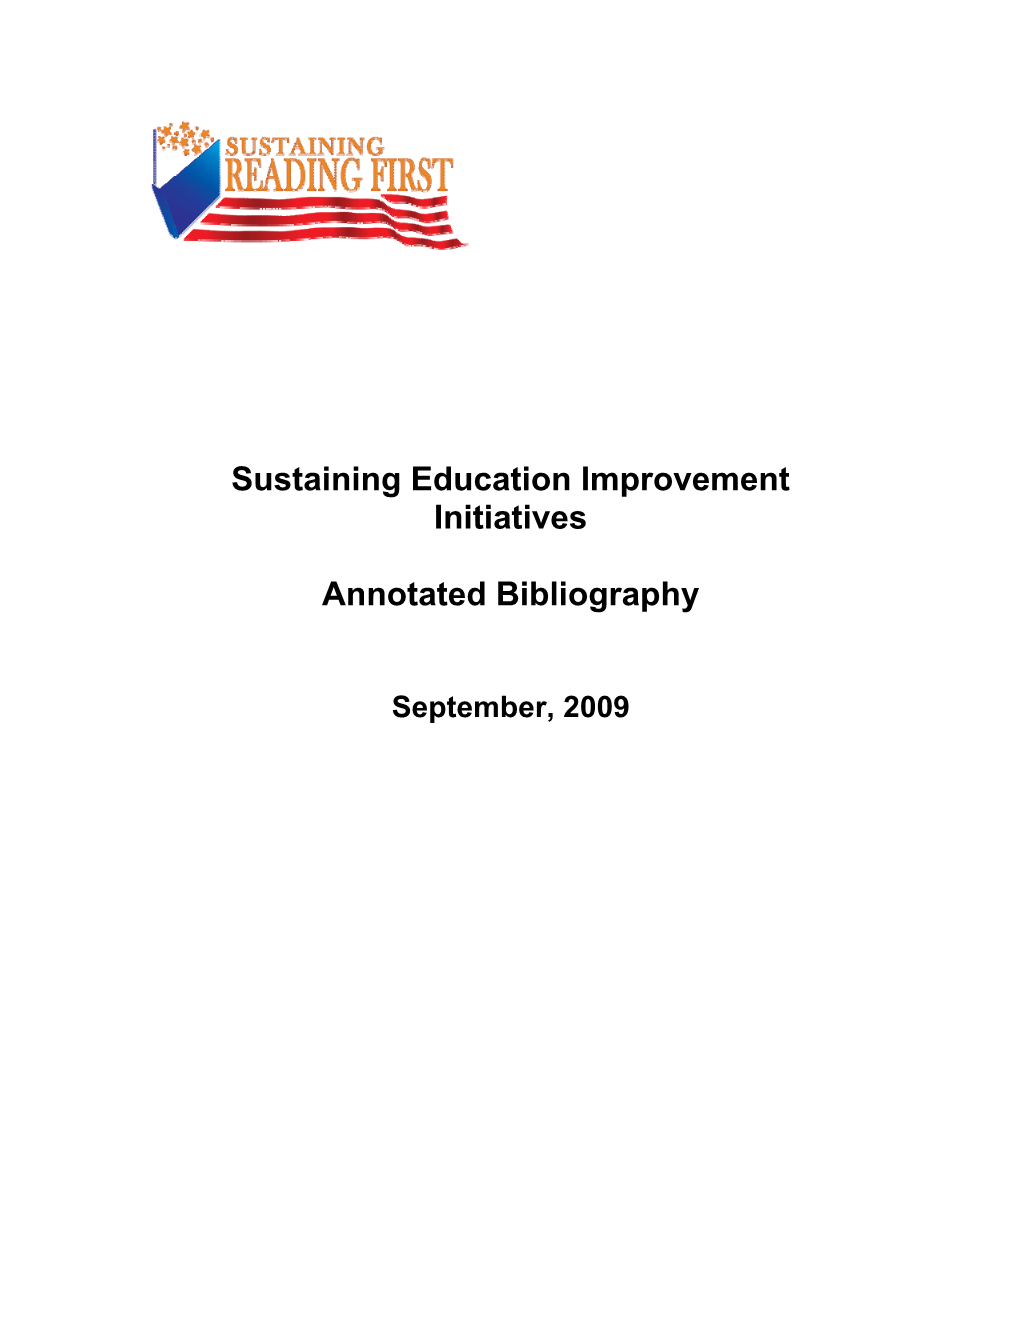 Reading First Sustainability Annotated Bibliography (MS WORD)